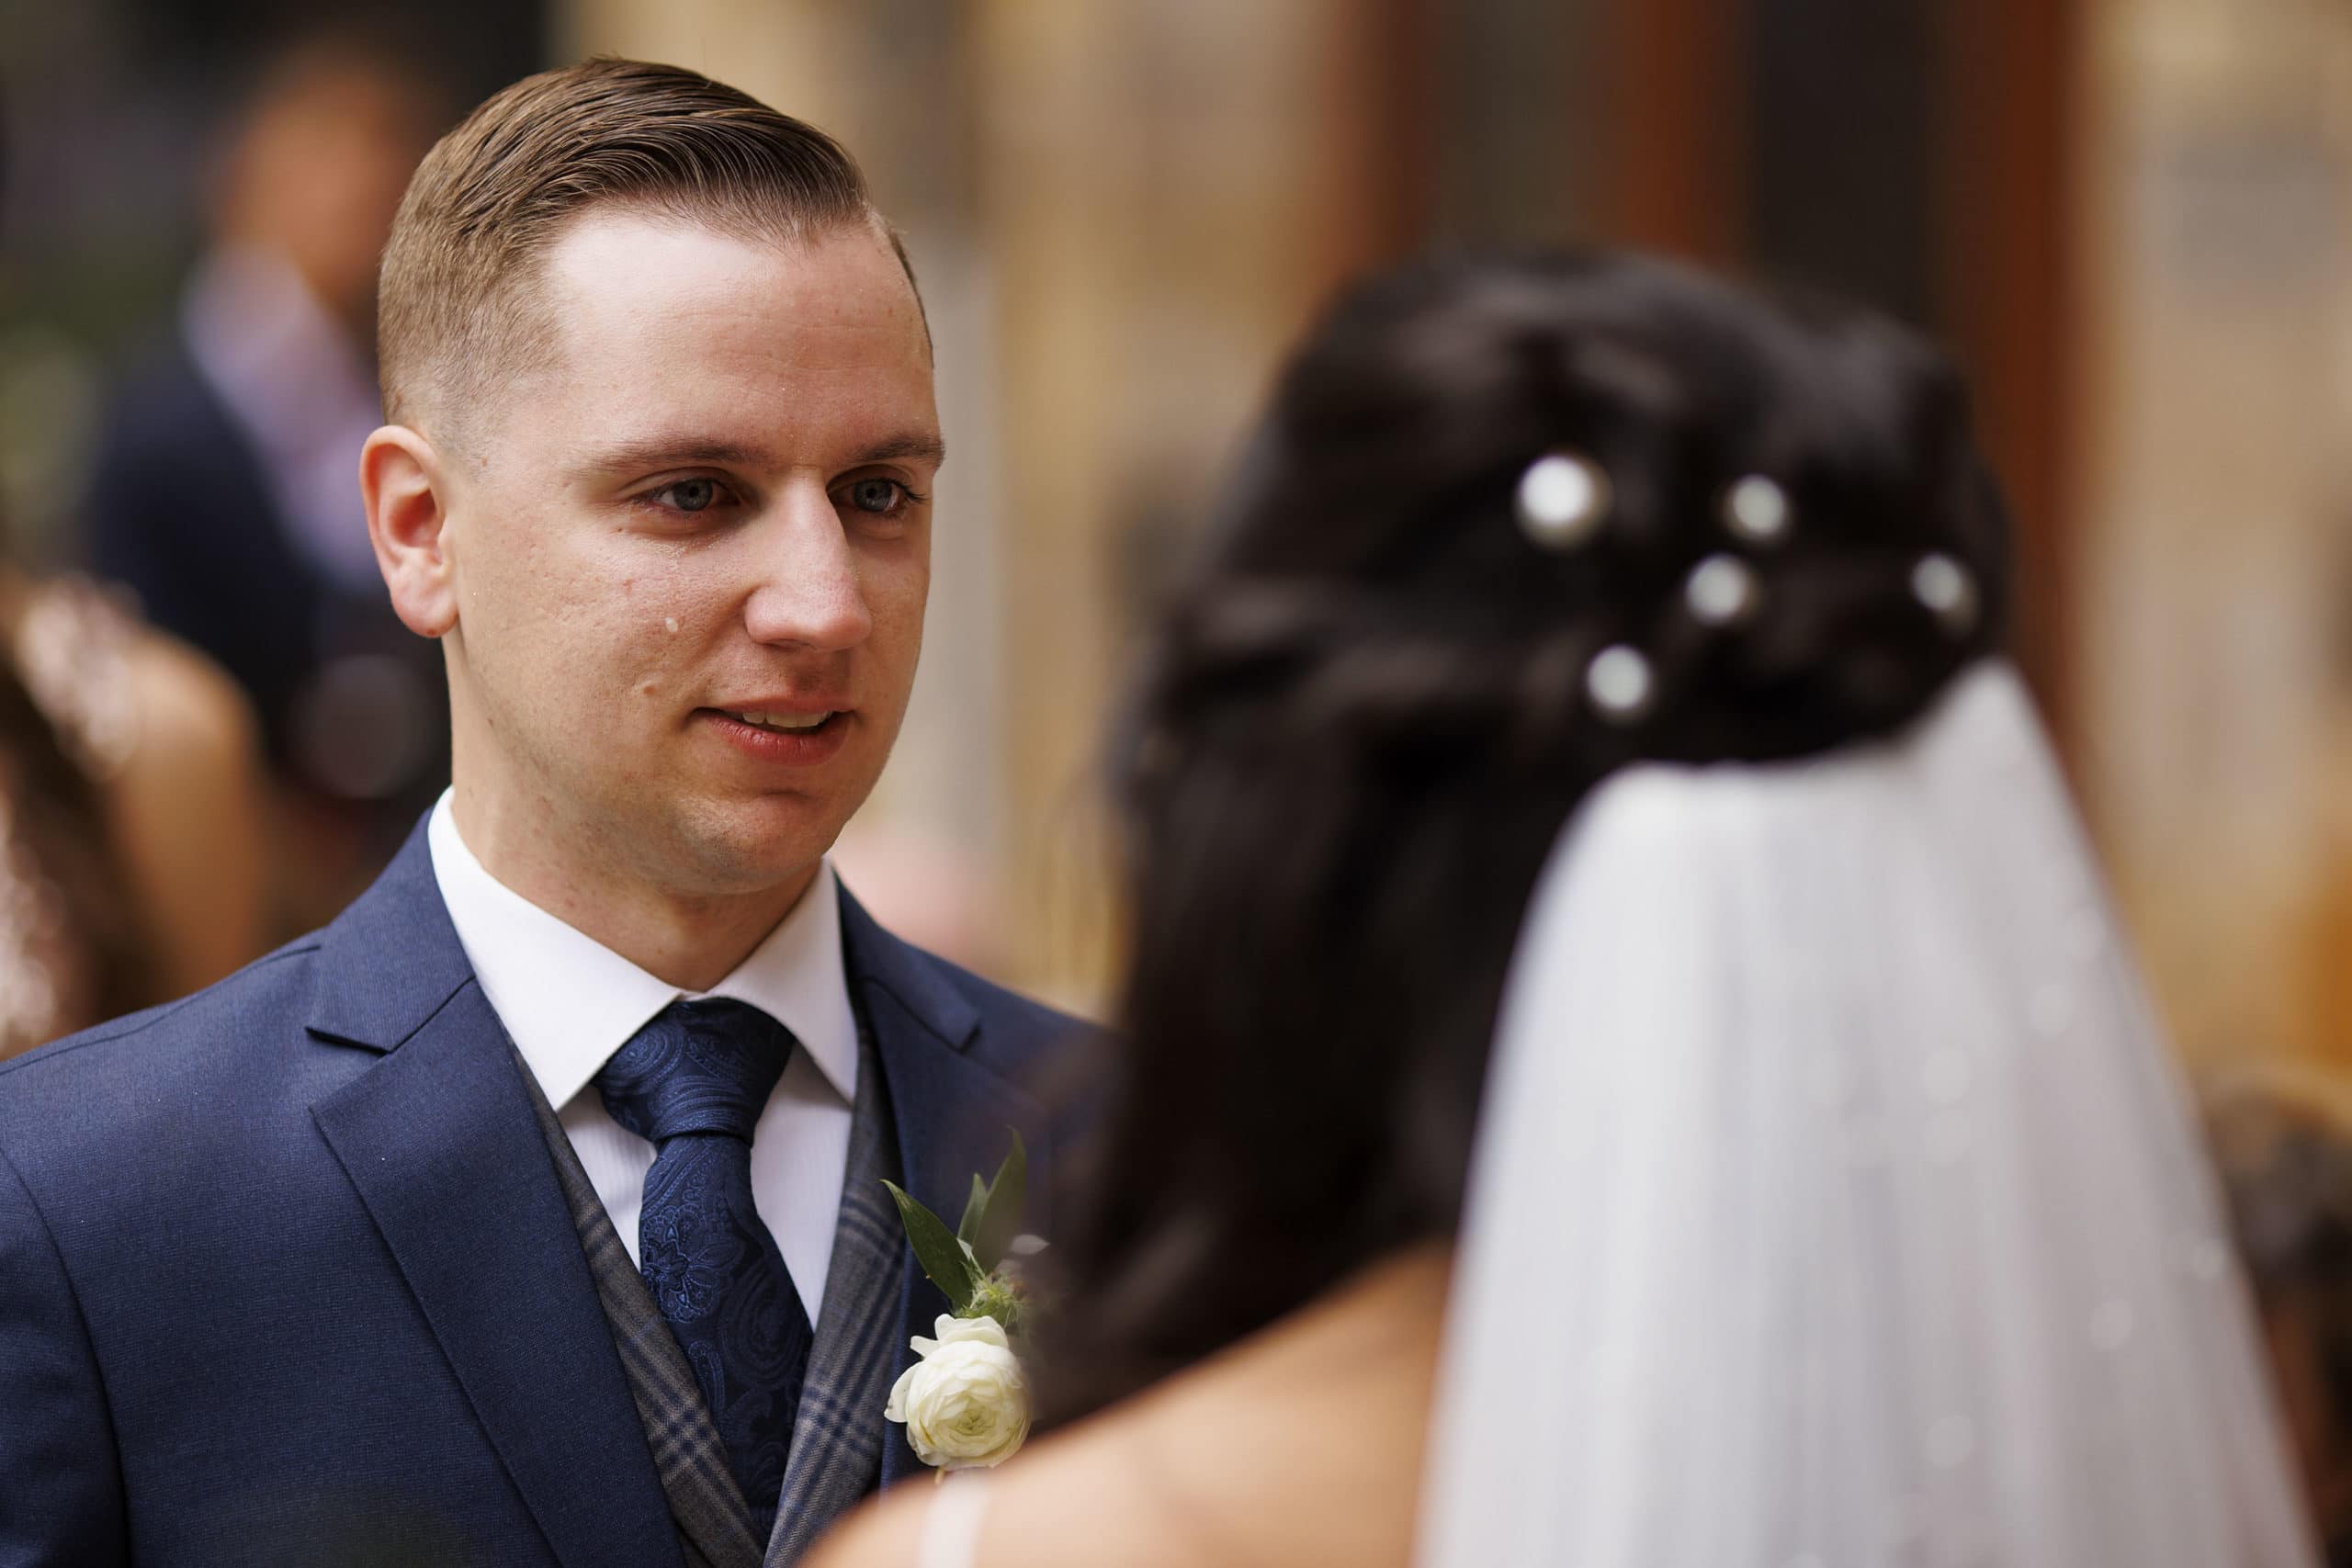 The groom cries as he reads his vows